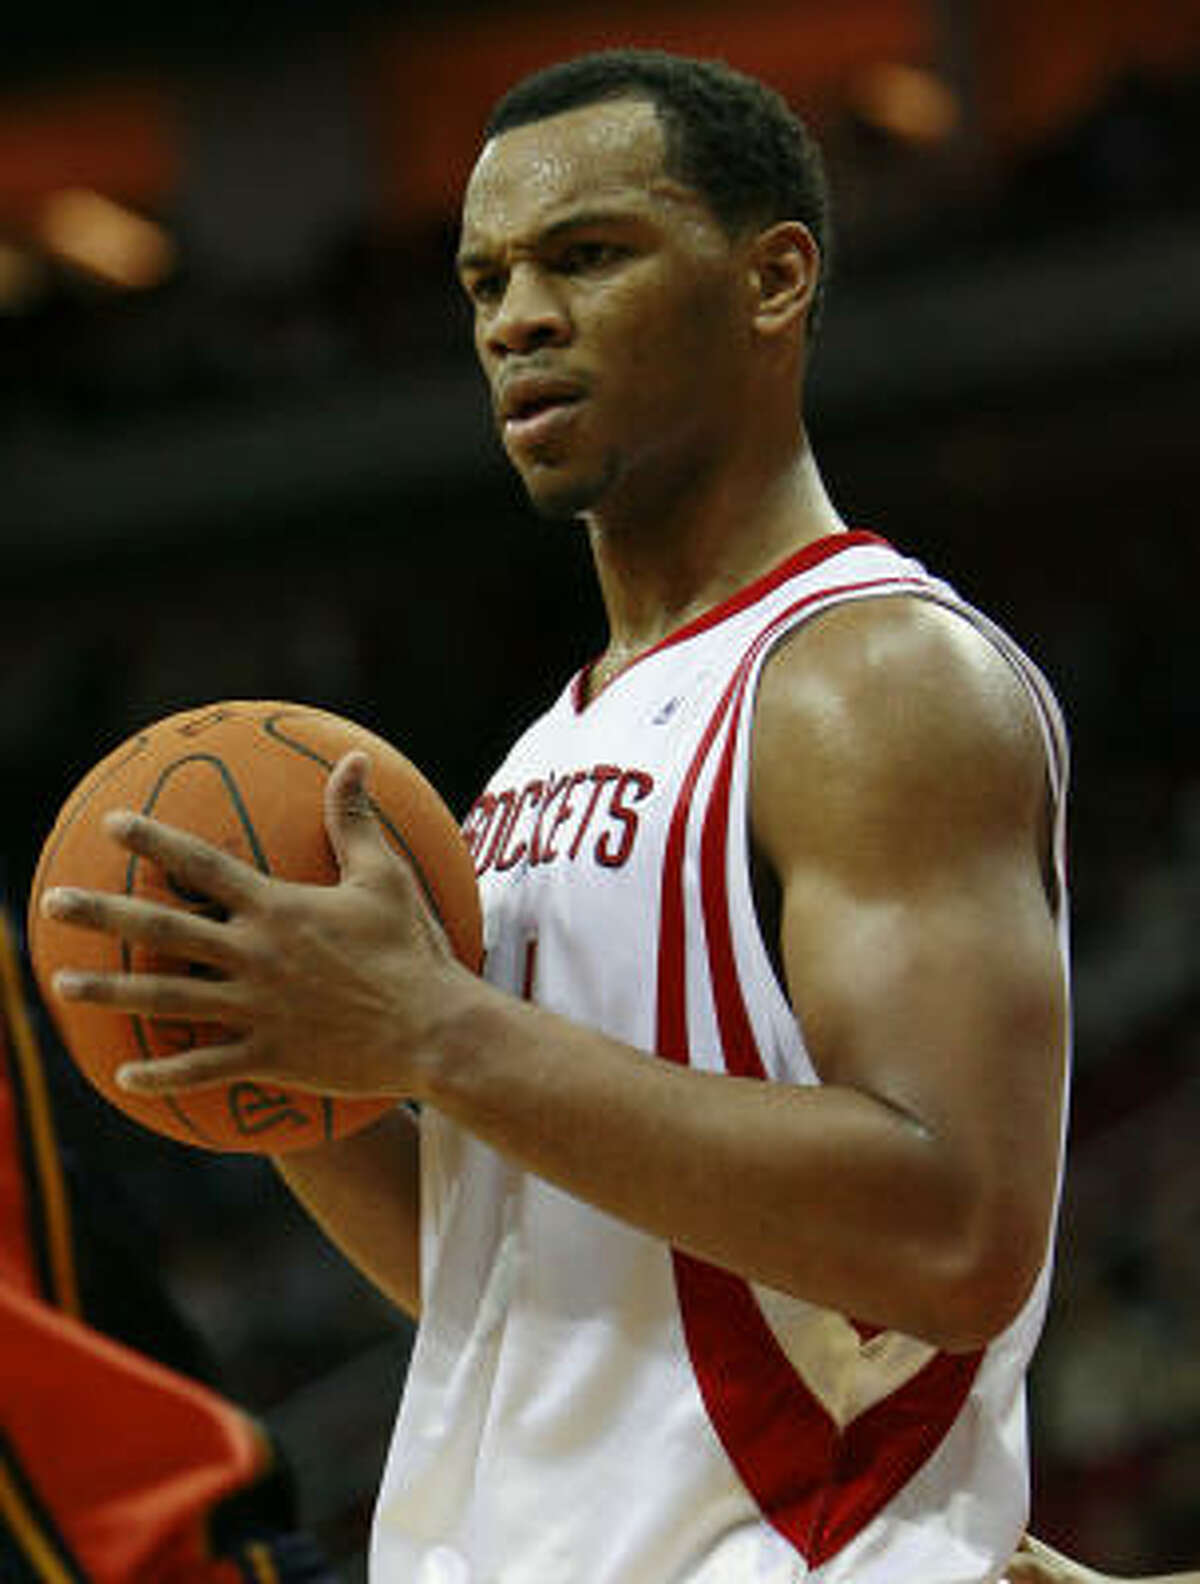 Chuck Hayes had a career high in rebounds (with 15) for the Rockets against the Warriors.